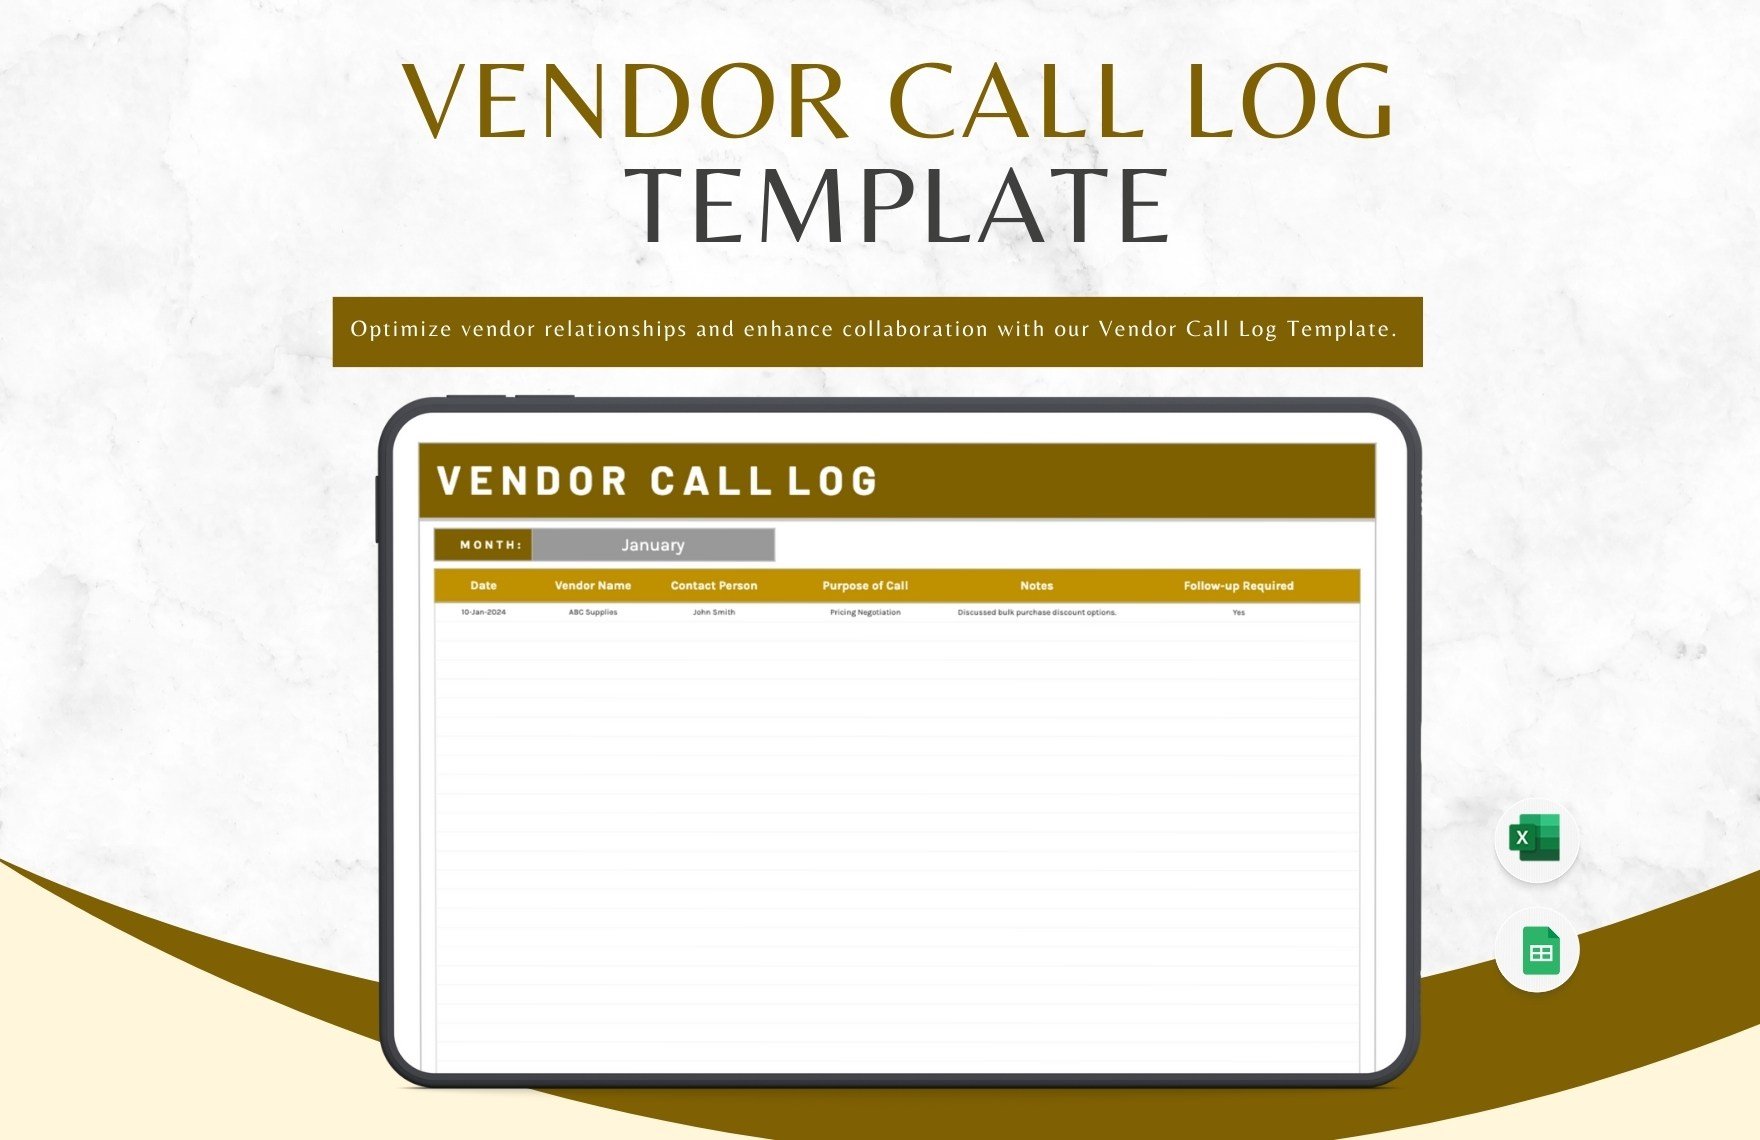 Vendor Call Log Template in Excel, Google Sheets